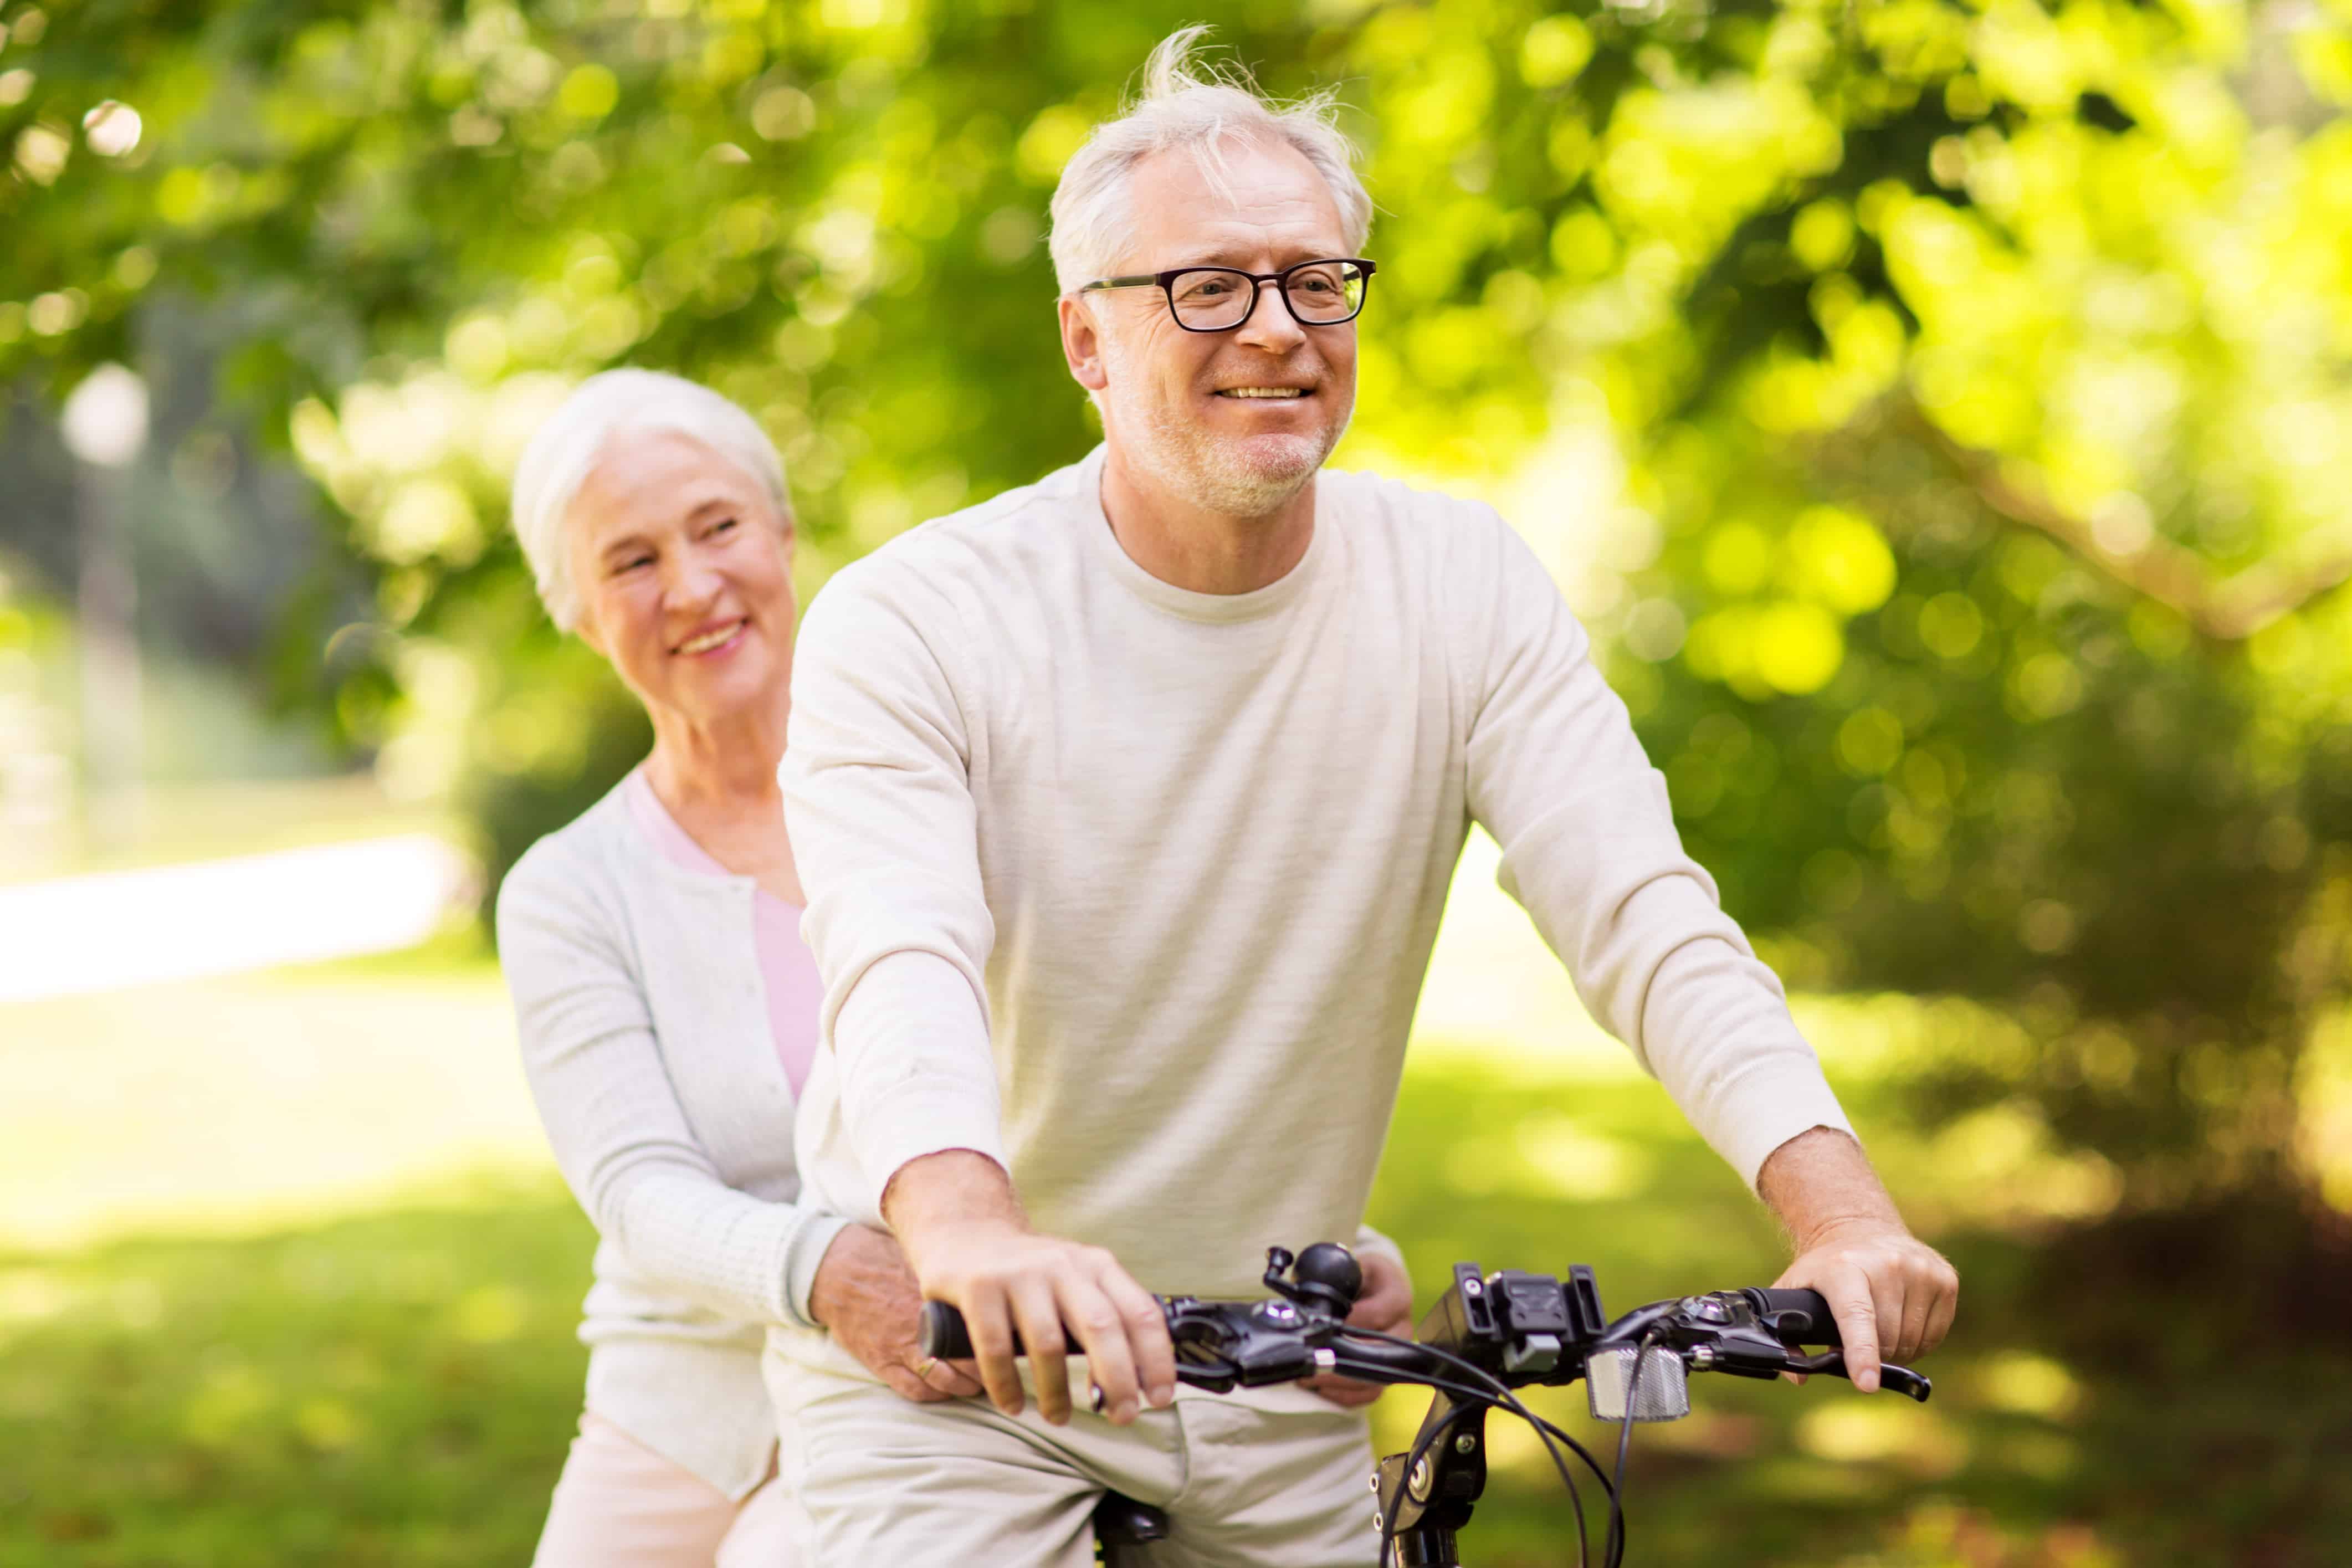 Two seniors riding on a bike together